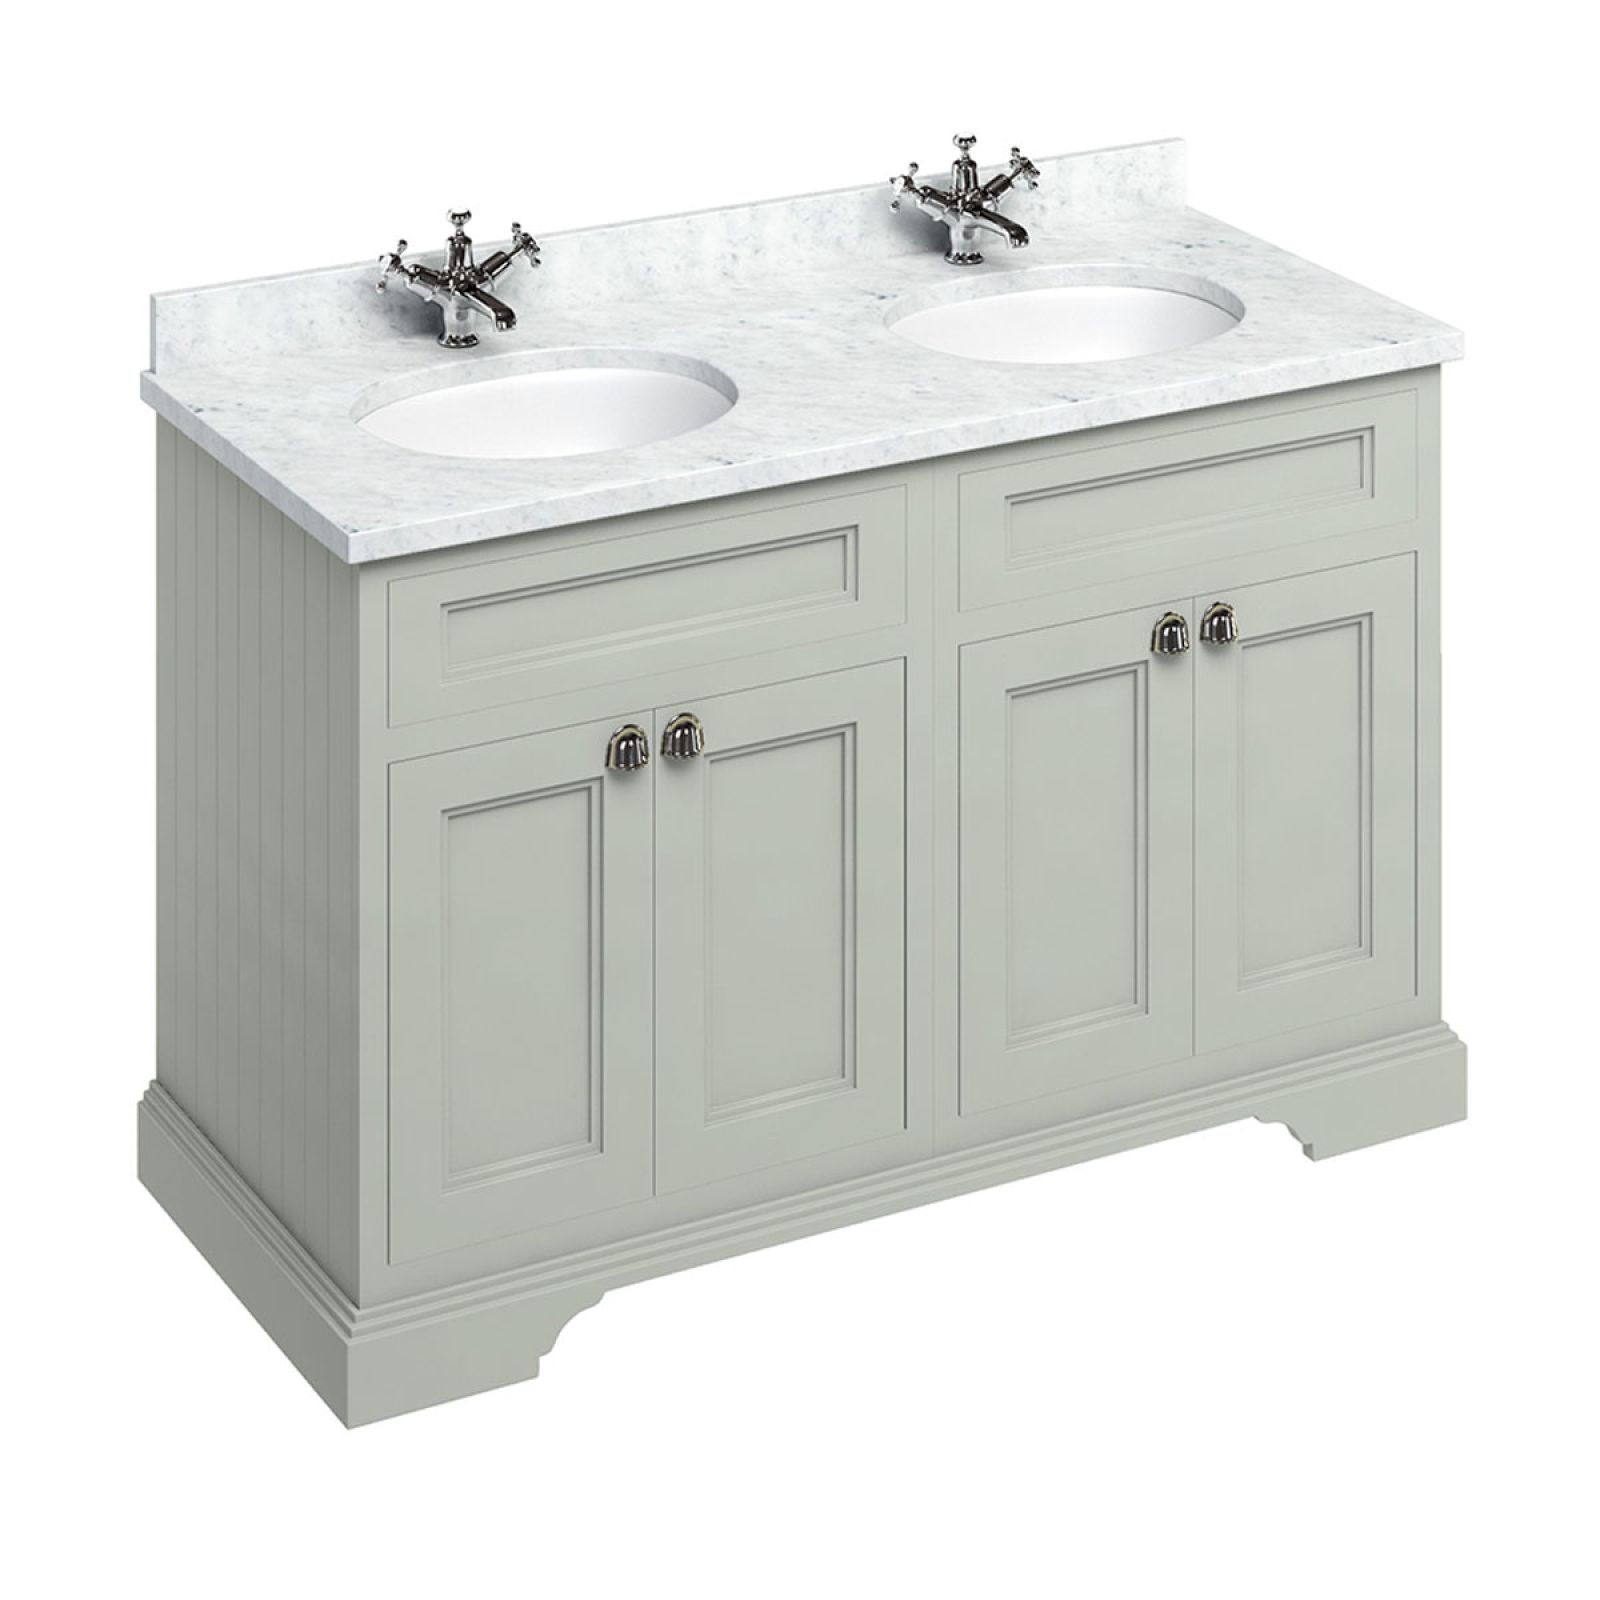 Freestanding 130cm wide Vanity Unit with worktop and 2 inset basins